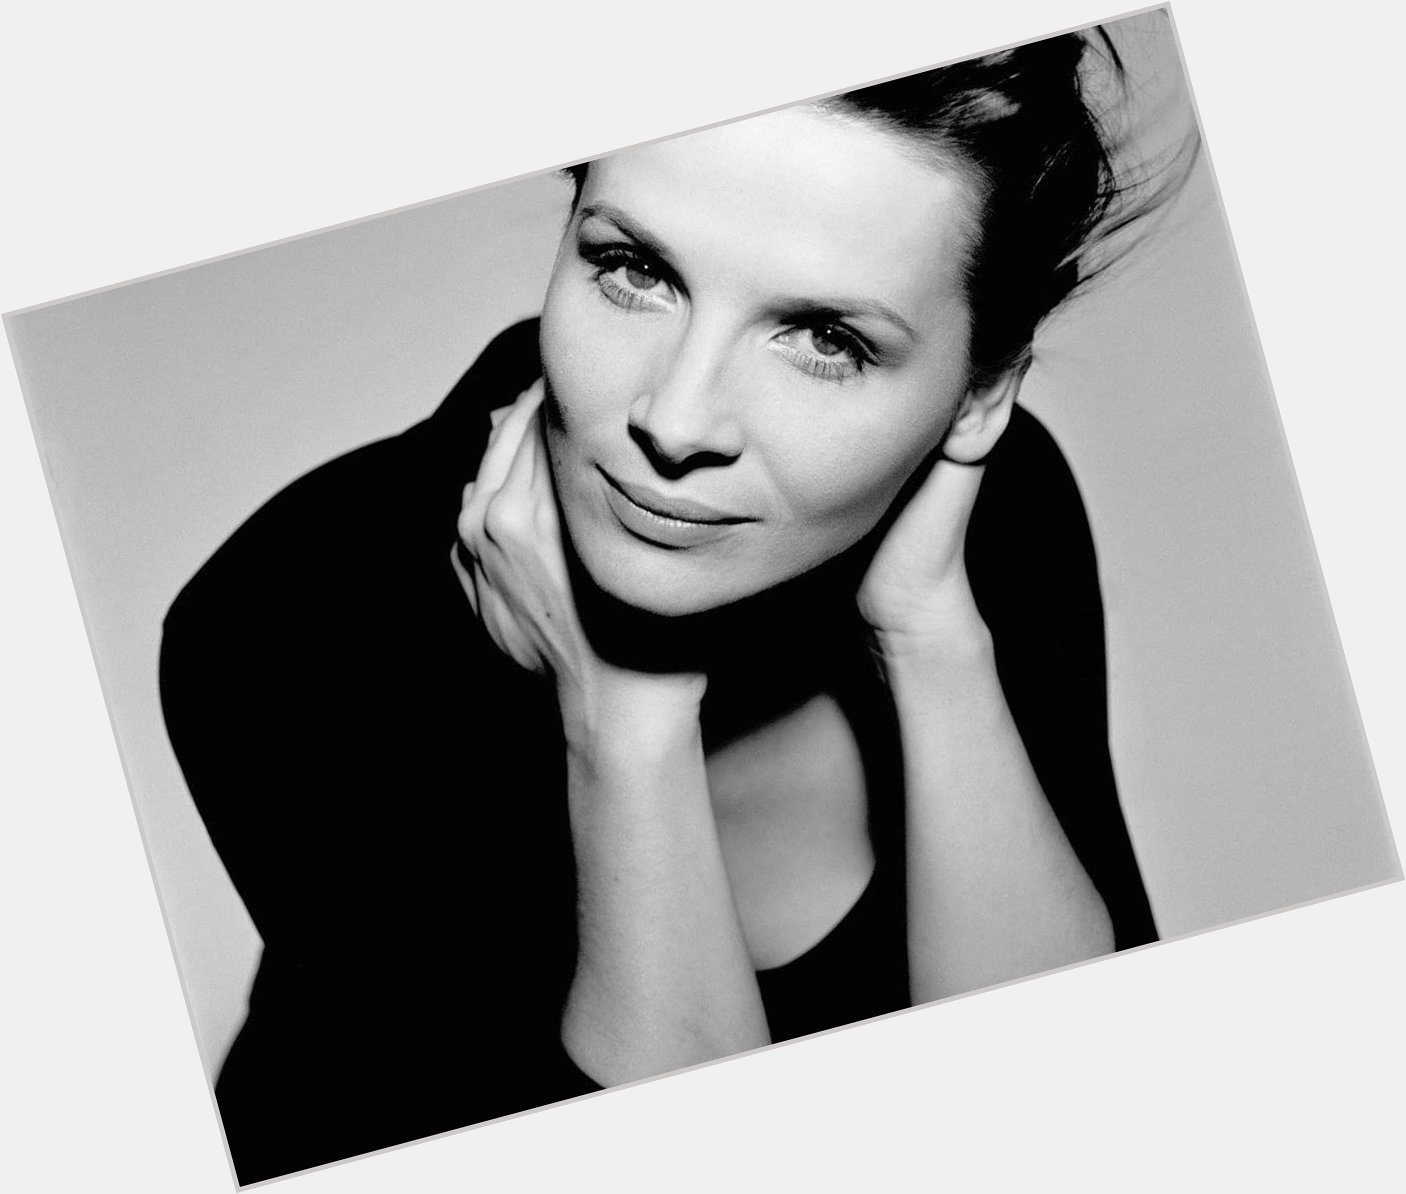 The one thing we could all do with more of these days is beauty .
Happy birthday Juliette Binoche . 